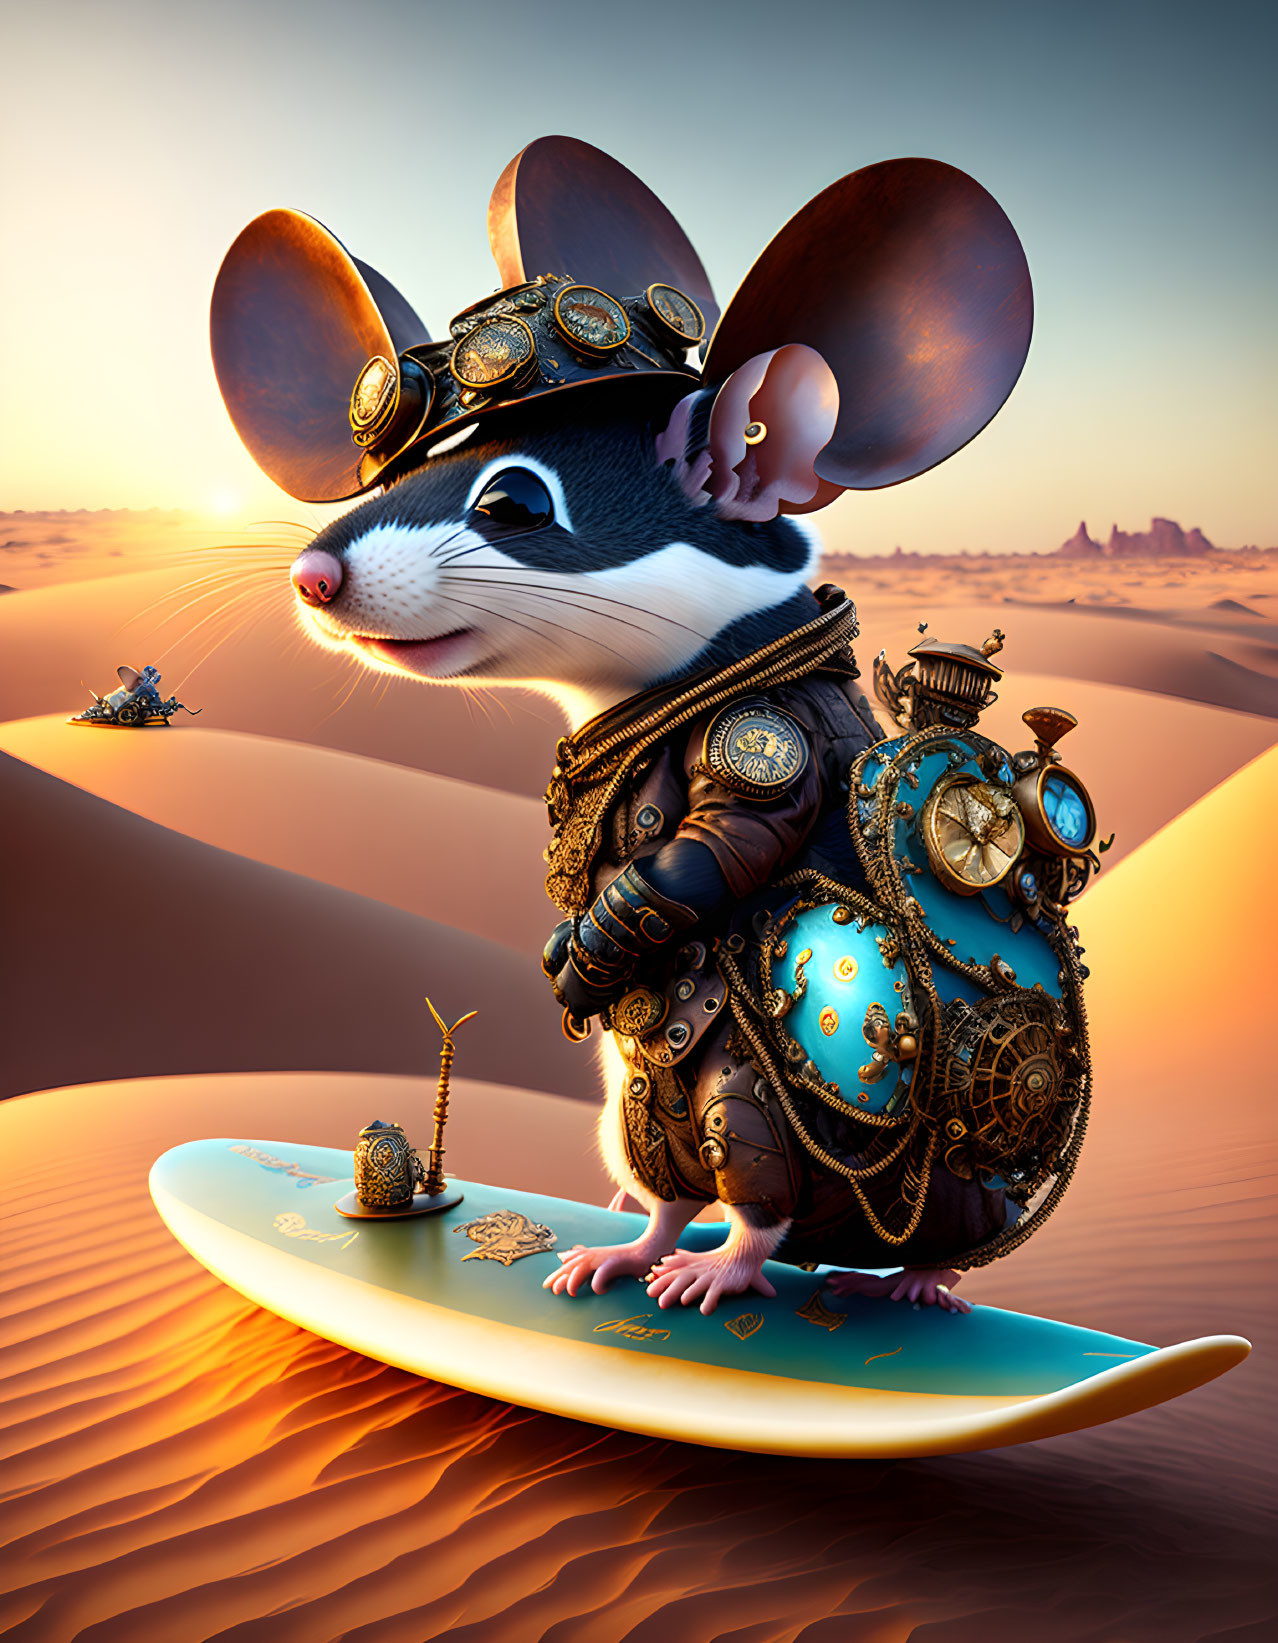 Steampunk-style mice on surfboard in desert with gear-adorned armor.